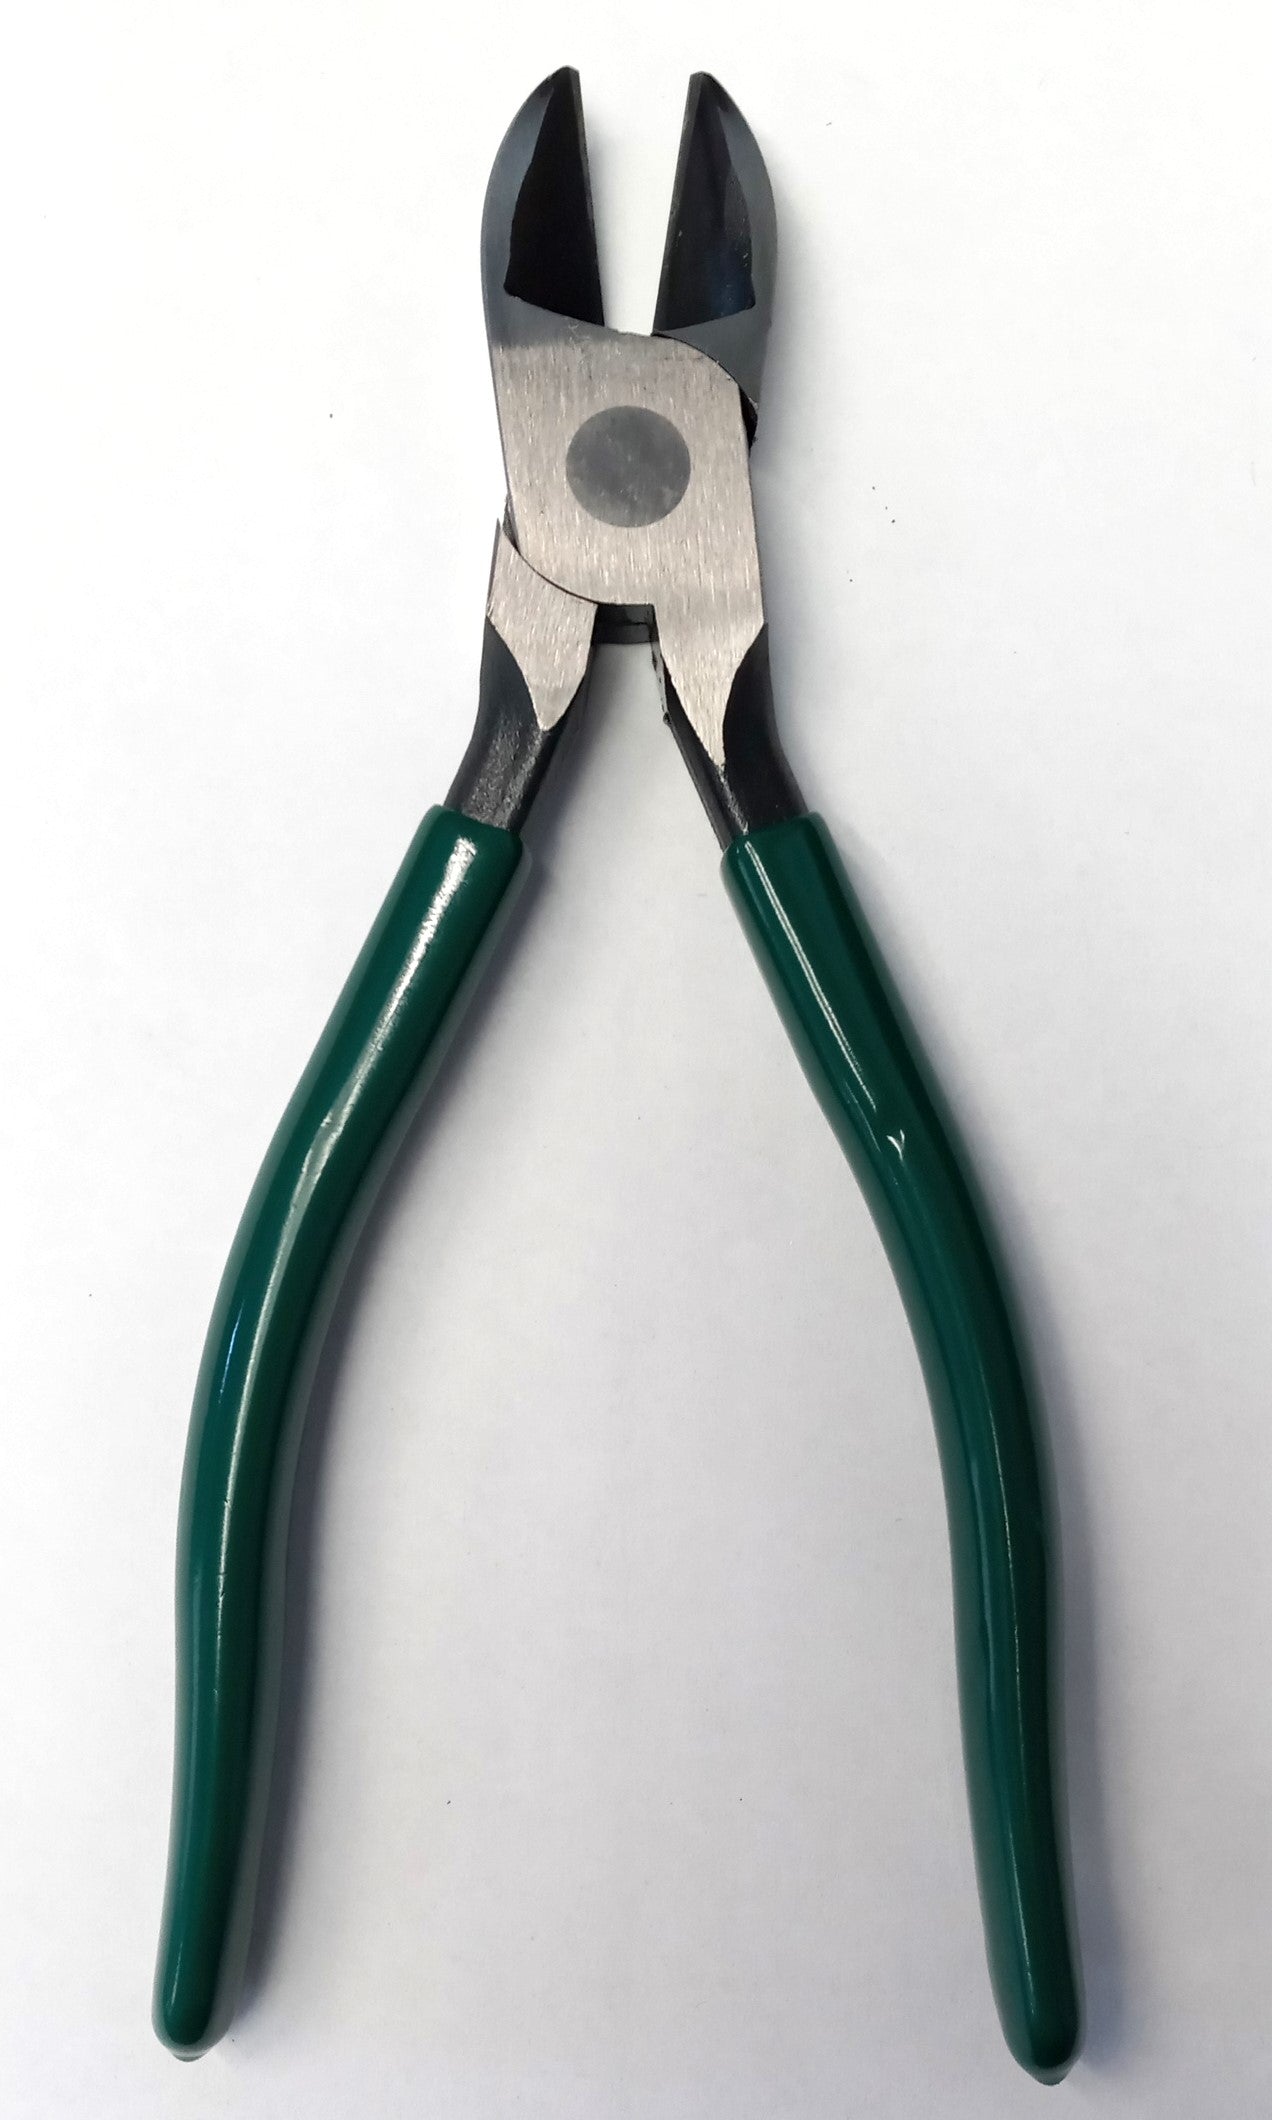 Allen 25407 7" Diagonal Cutting Pliers with Grip USA